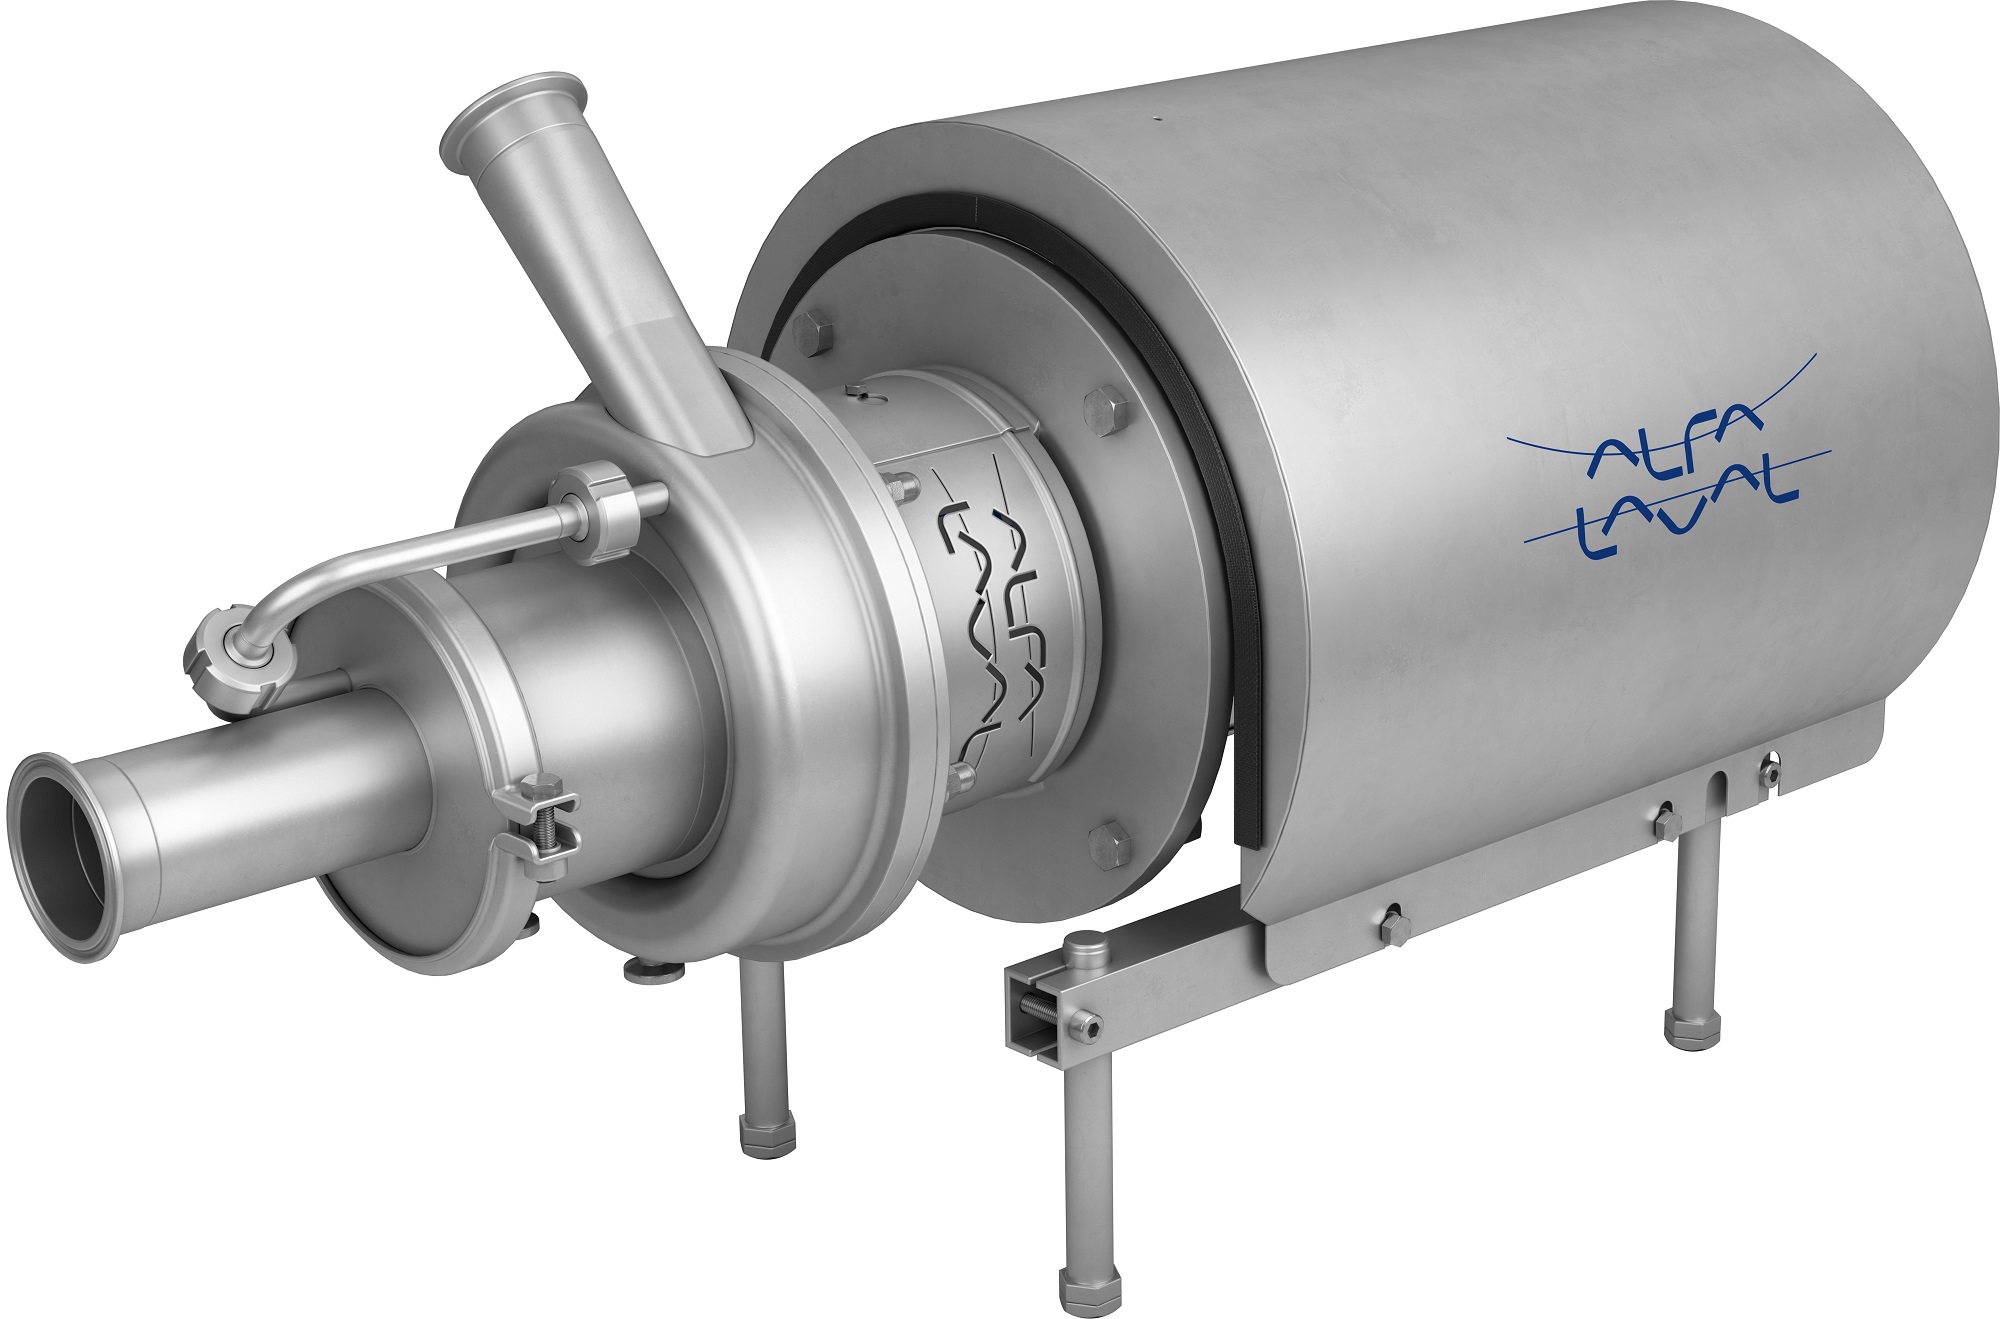 Alfa Laval has added the new LKH Prime 10 UltraPure self-priming pump and upgraded LeviMag UltraPure magnetic mixers to the range.